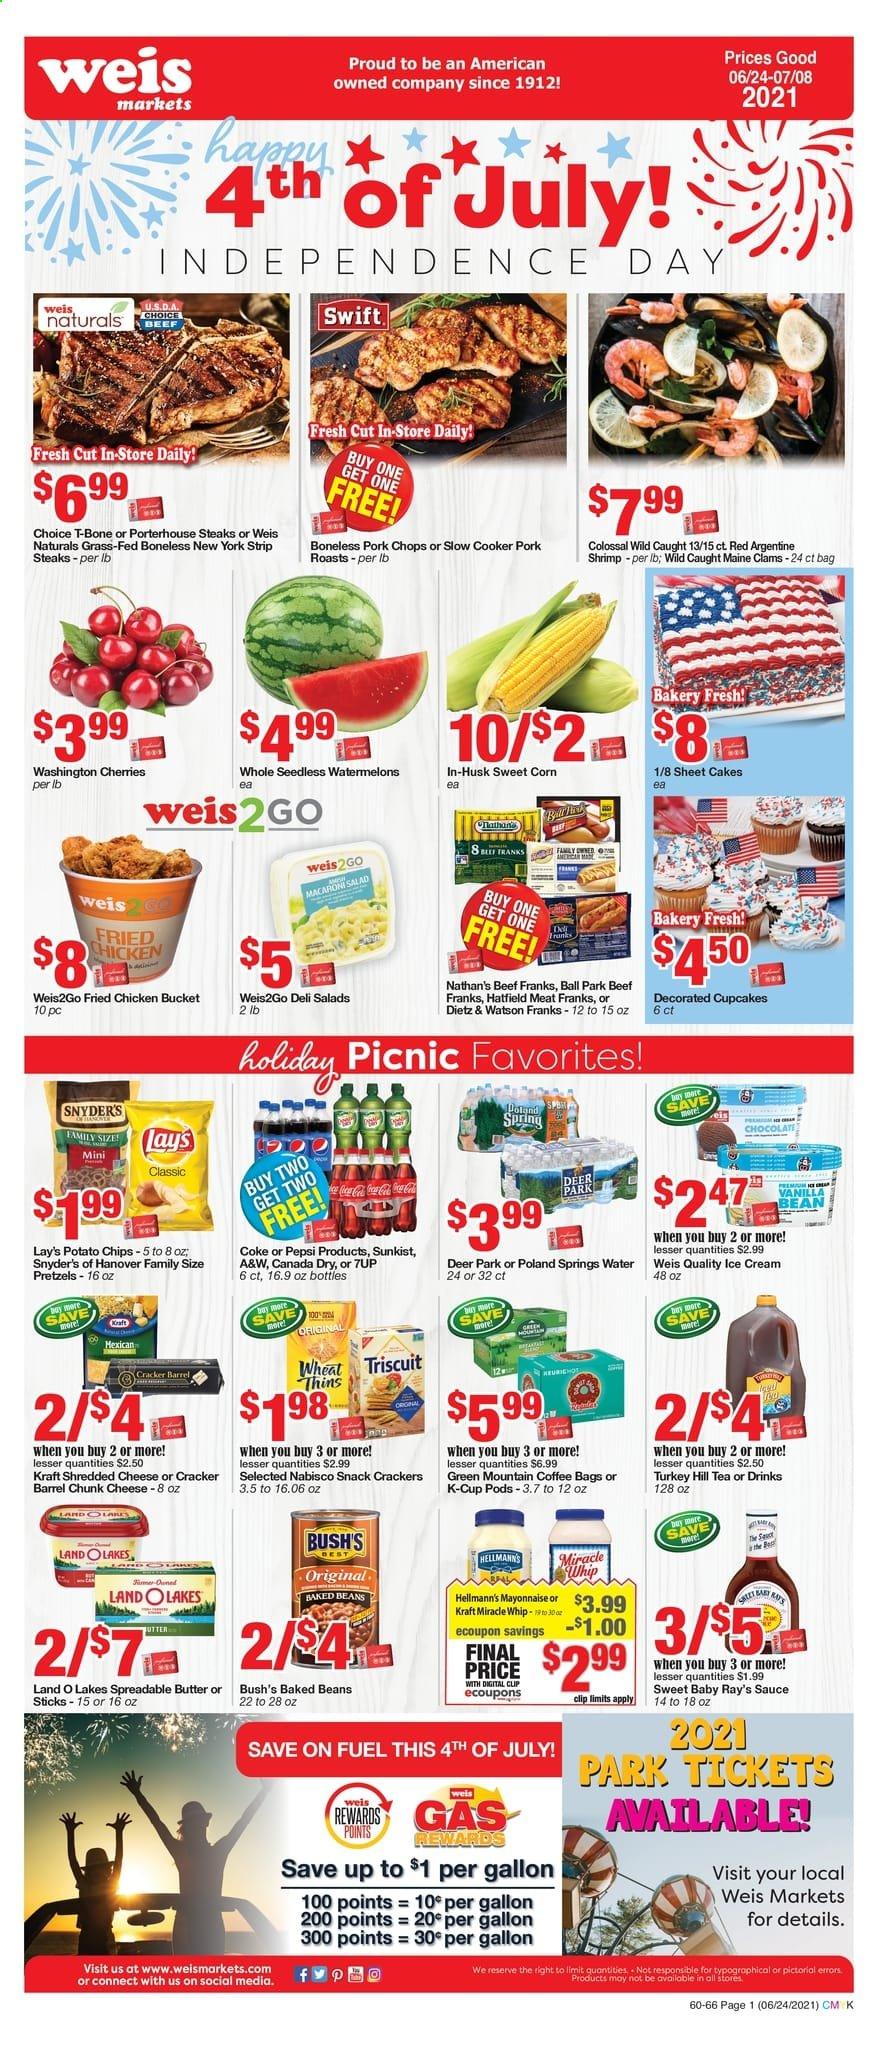 thumbnail - Weis Flyer - 06/24/2021 - 07/08/2021 - Sales products - pretzels, cake, cupcake, corn, salad, sweet corn, cherries, beef meat, t-bone steak, steak, portehouse steak, striploin steak, pork chops, pork meat, clams, shrimps, sauce, fried chicken, Kraft®, Dietz & Watson, macaroni salad, shredded cheese, chunk cheese, butter, spreadable butter, mayonnaise, Miracle Whip, ice cream, snack, crackers, potato chips, chips, Lay’s, Thins, baked beans, Canada Dry, Pepsi, 7UP, A&W, tea, coffee, coffee capsules, K-Cups, Green Mountain. Page 1.